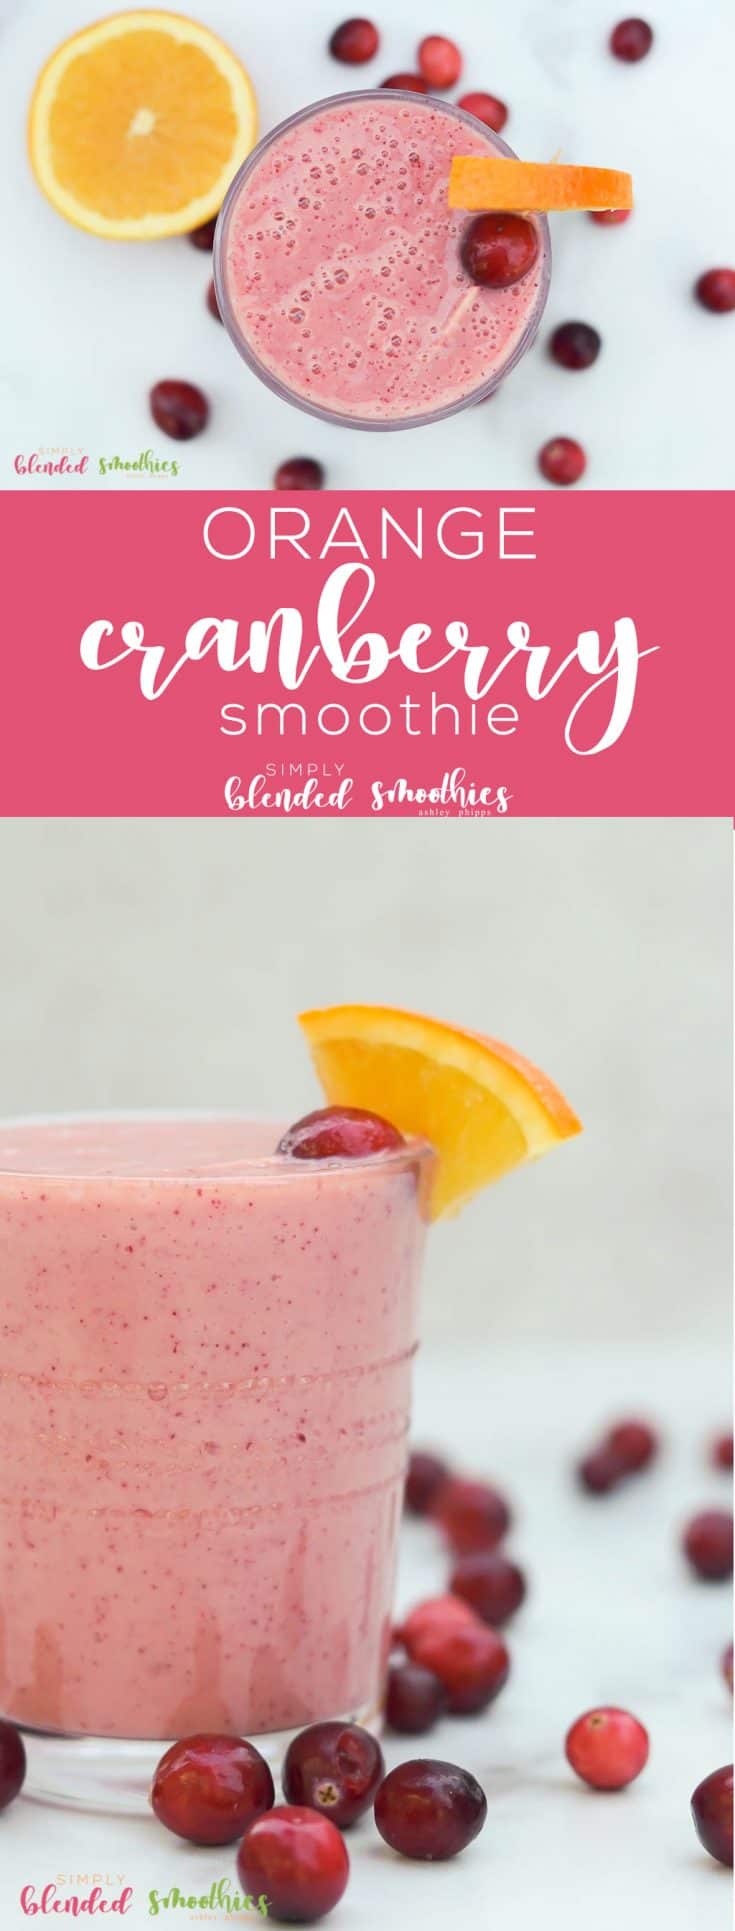 Cranberry Orange Smoothie | Simply Blended Smoothies